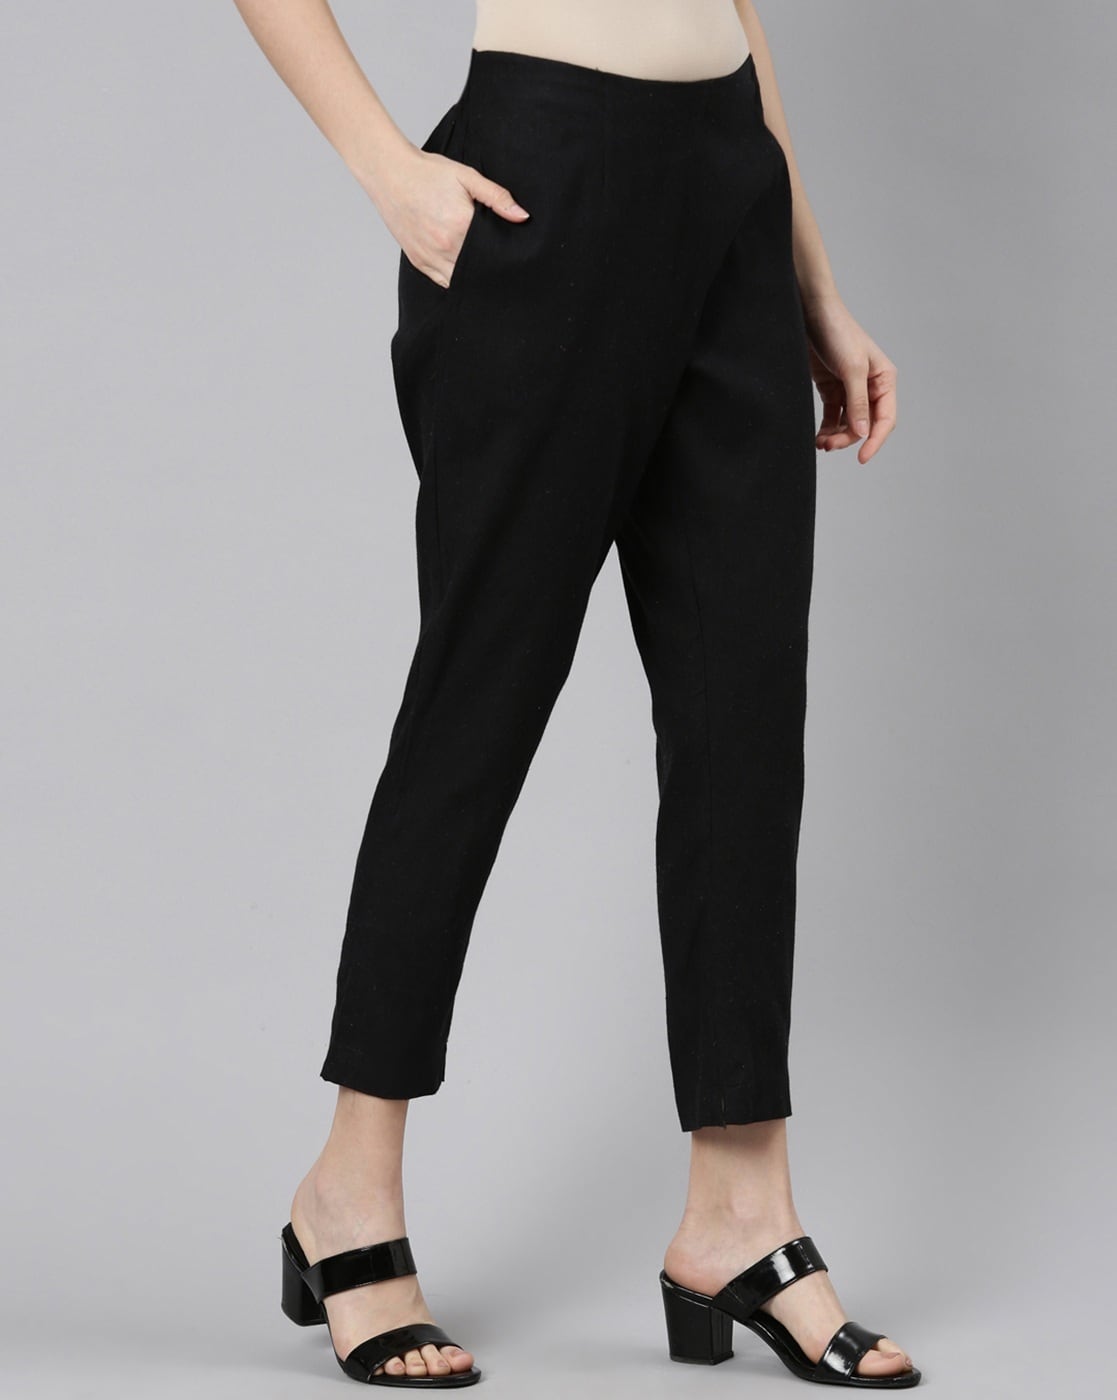 Buy ANARO Women's Straight Fit Cigarette Pants  (Pencil_Pant_black_Black_X-Large) at Amazon.in